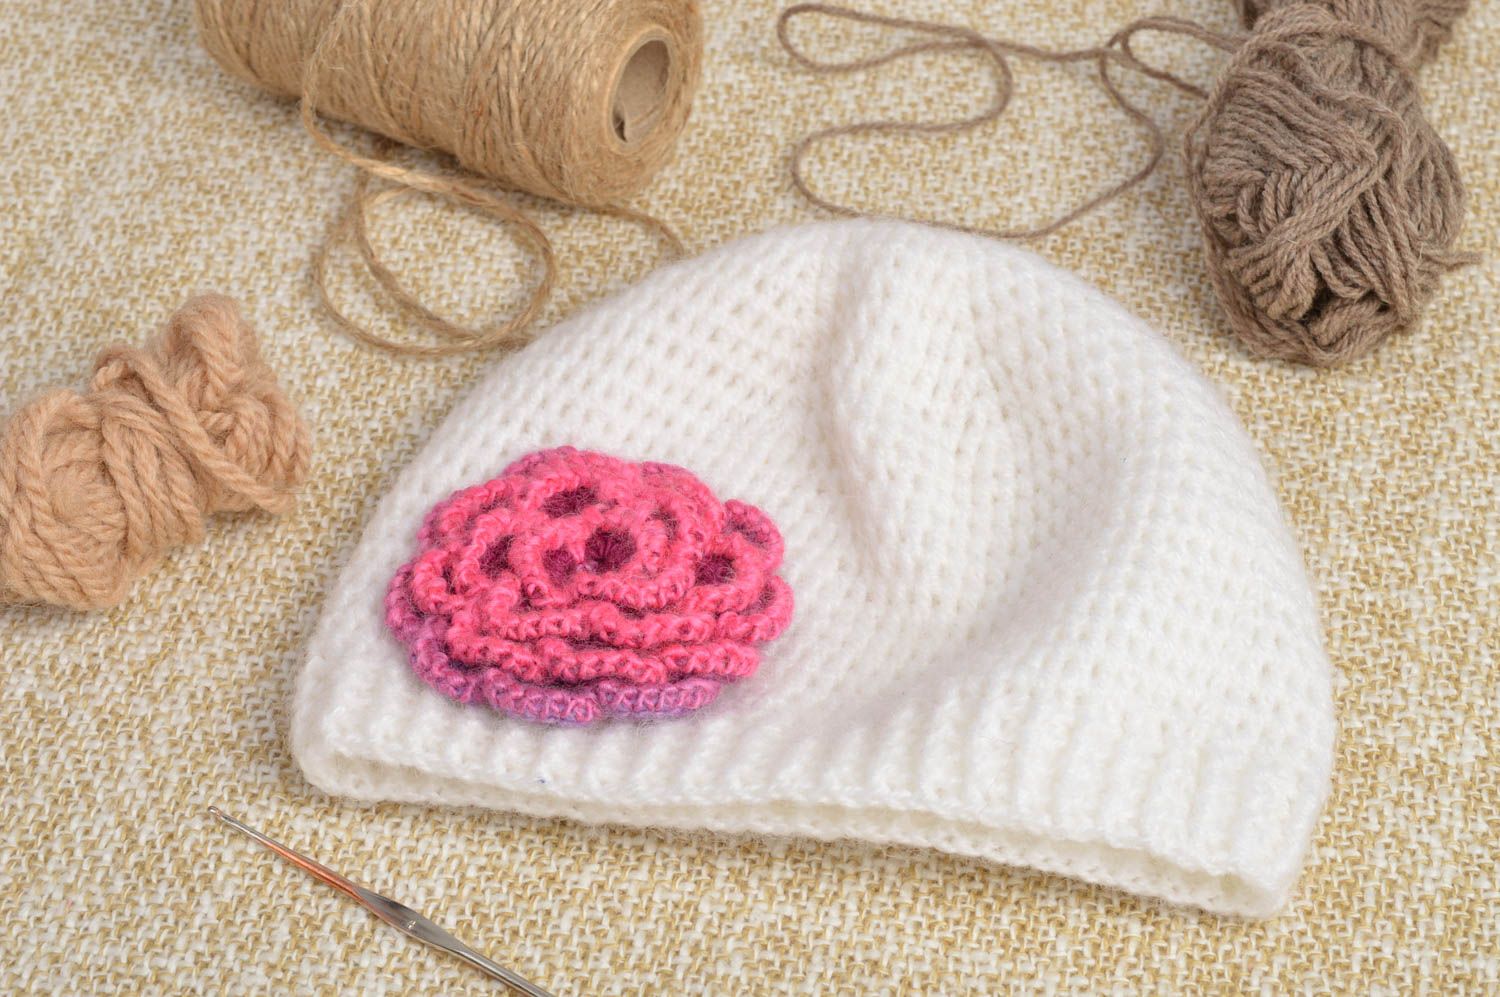 Toddle hat winter hat crochet baby hat girls hat kids accessories gifts for kids photo 1